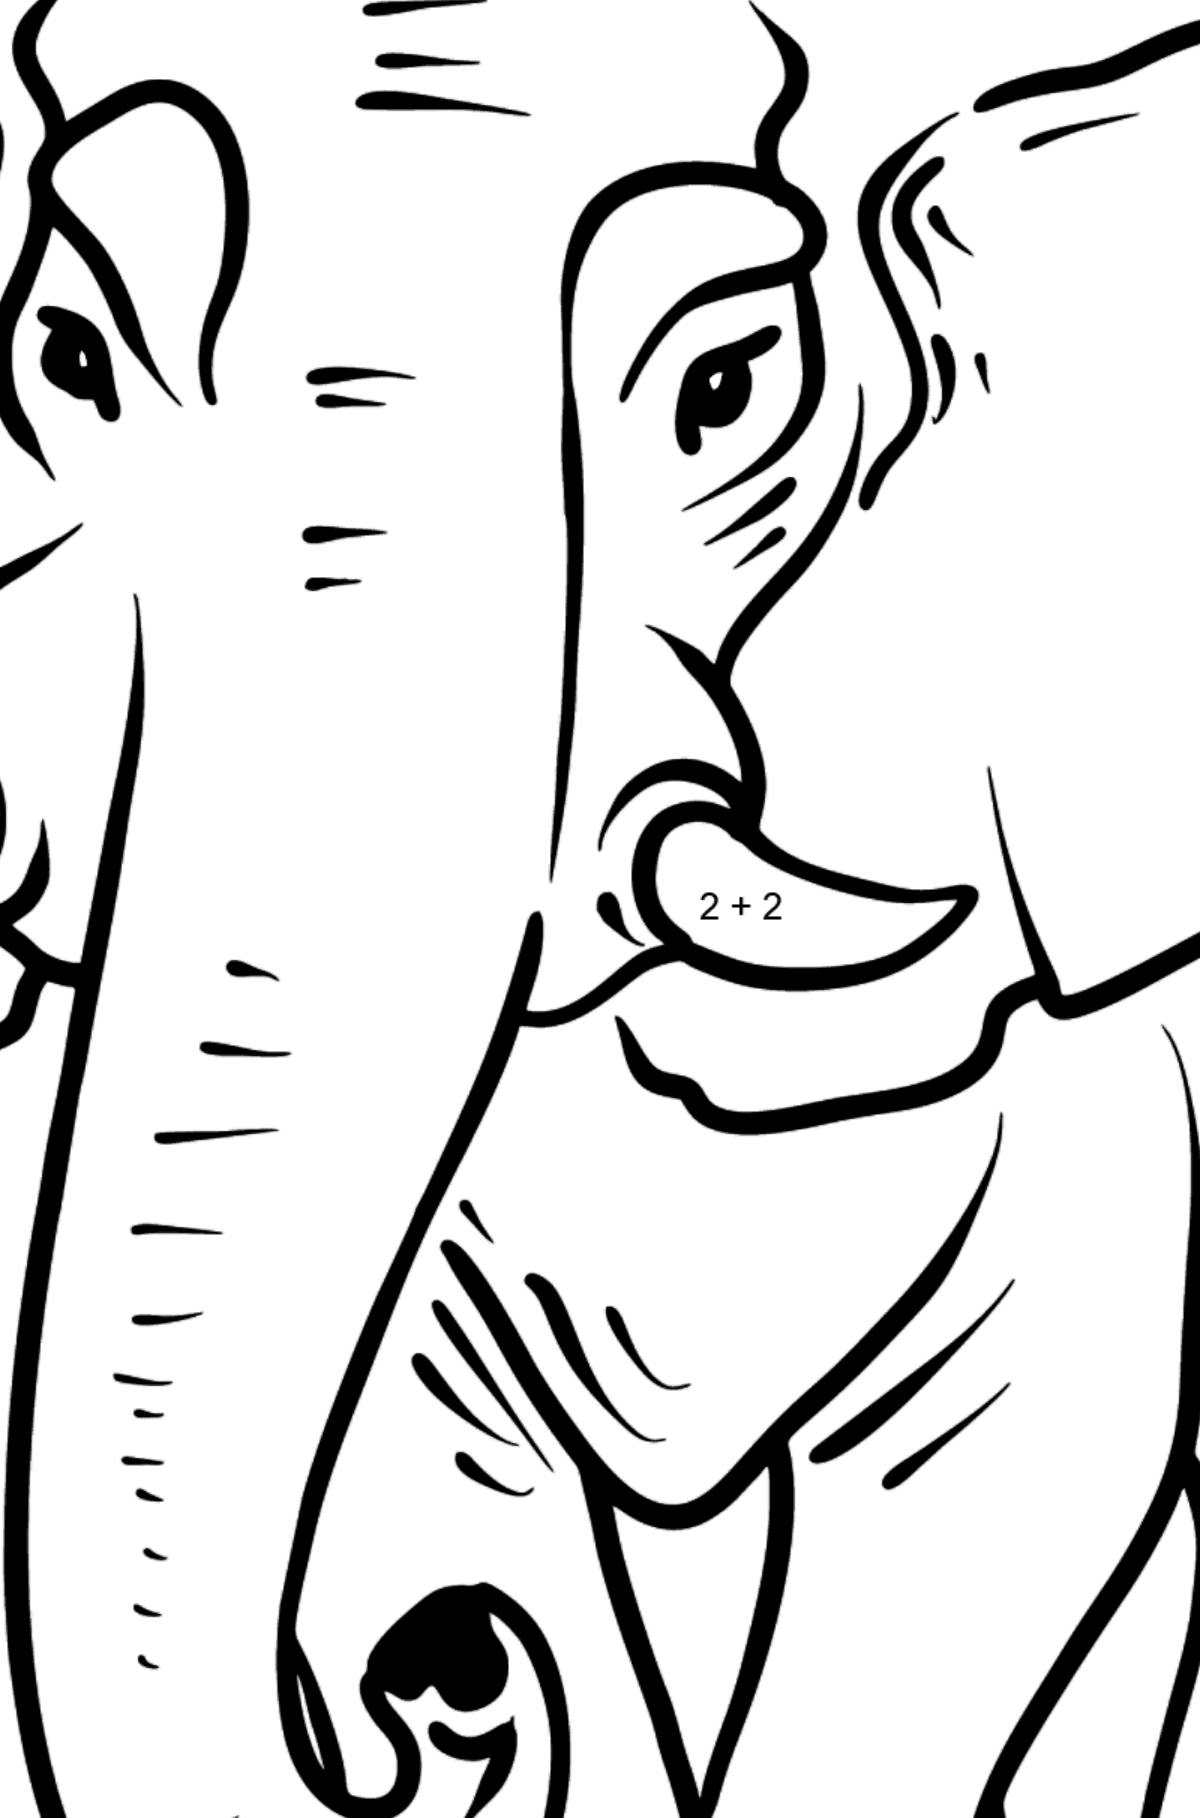 Elephant coloring page - Math Coloring - Addition for Kids